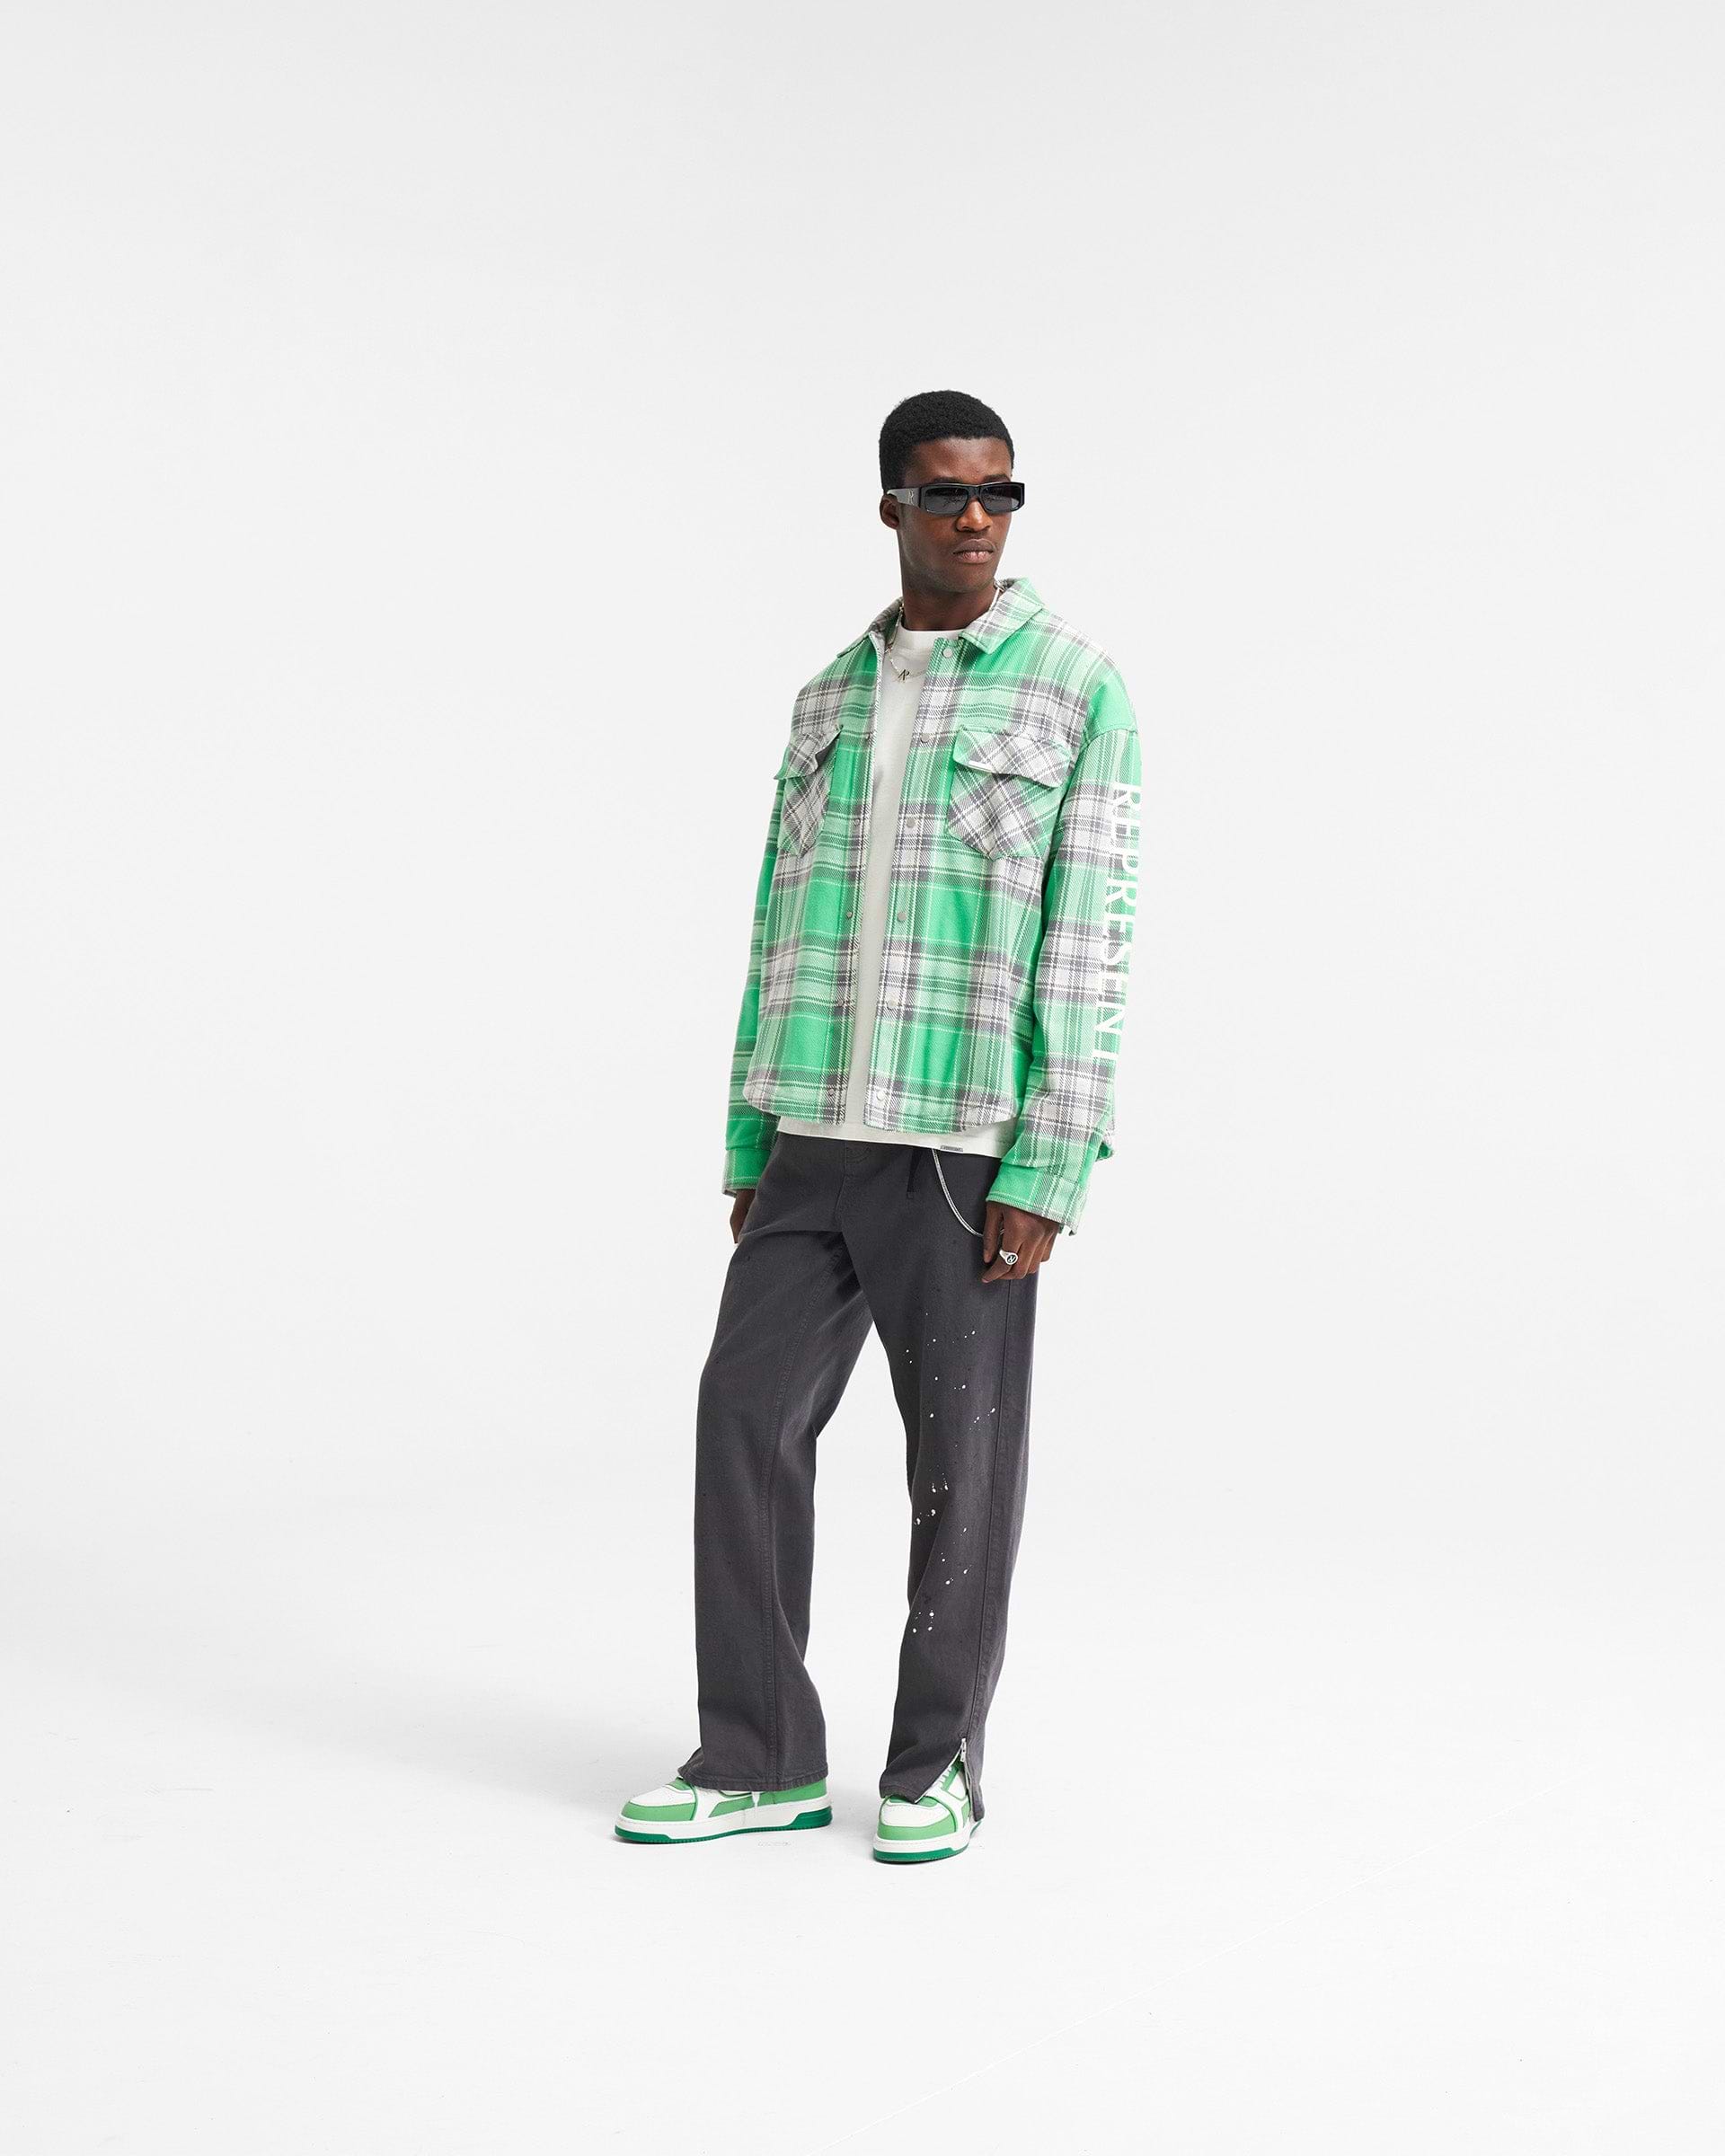 Represent QUILTED FLANNEL SHIRT Green/Grey